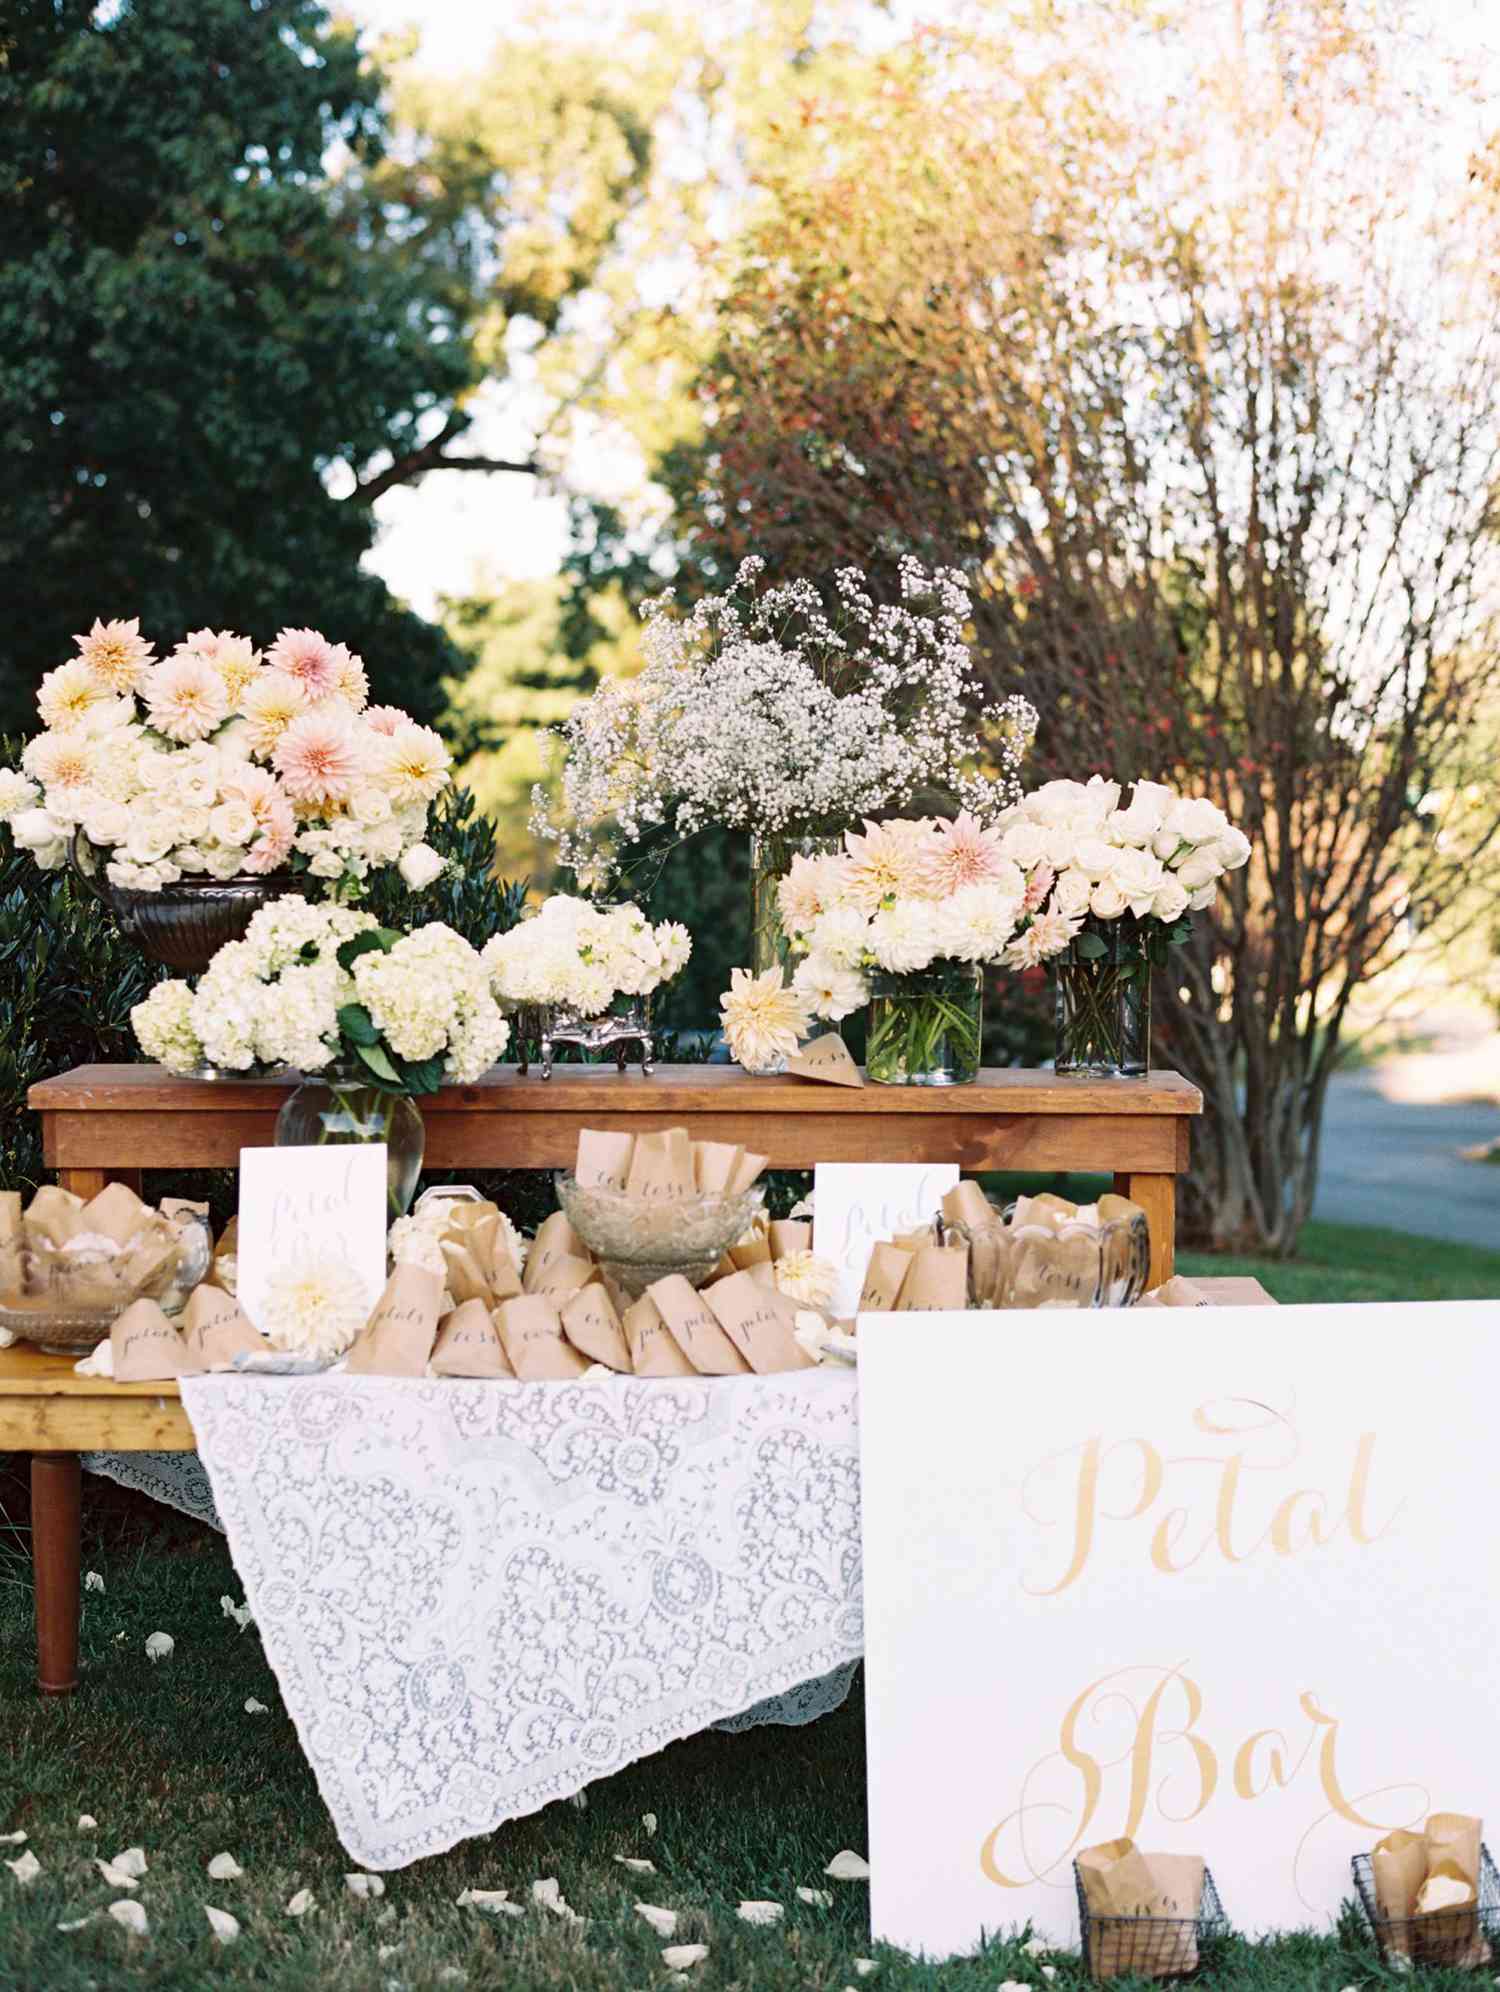 Wedding Ceremony Petal Bar with Sign, Bags of Flower Petals